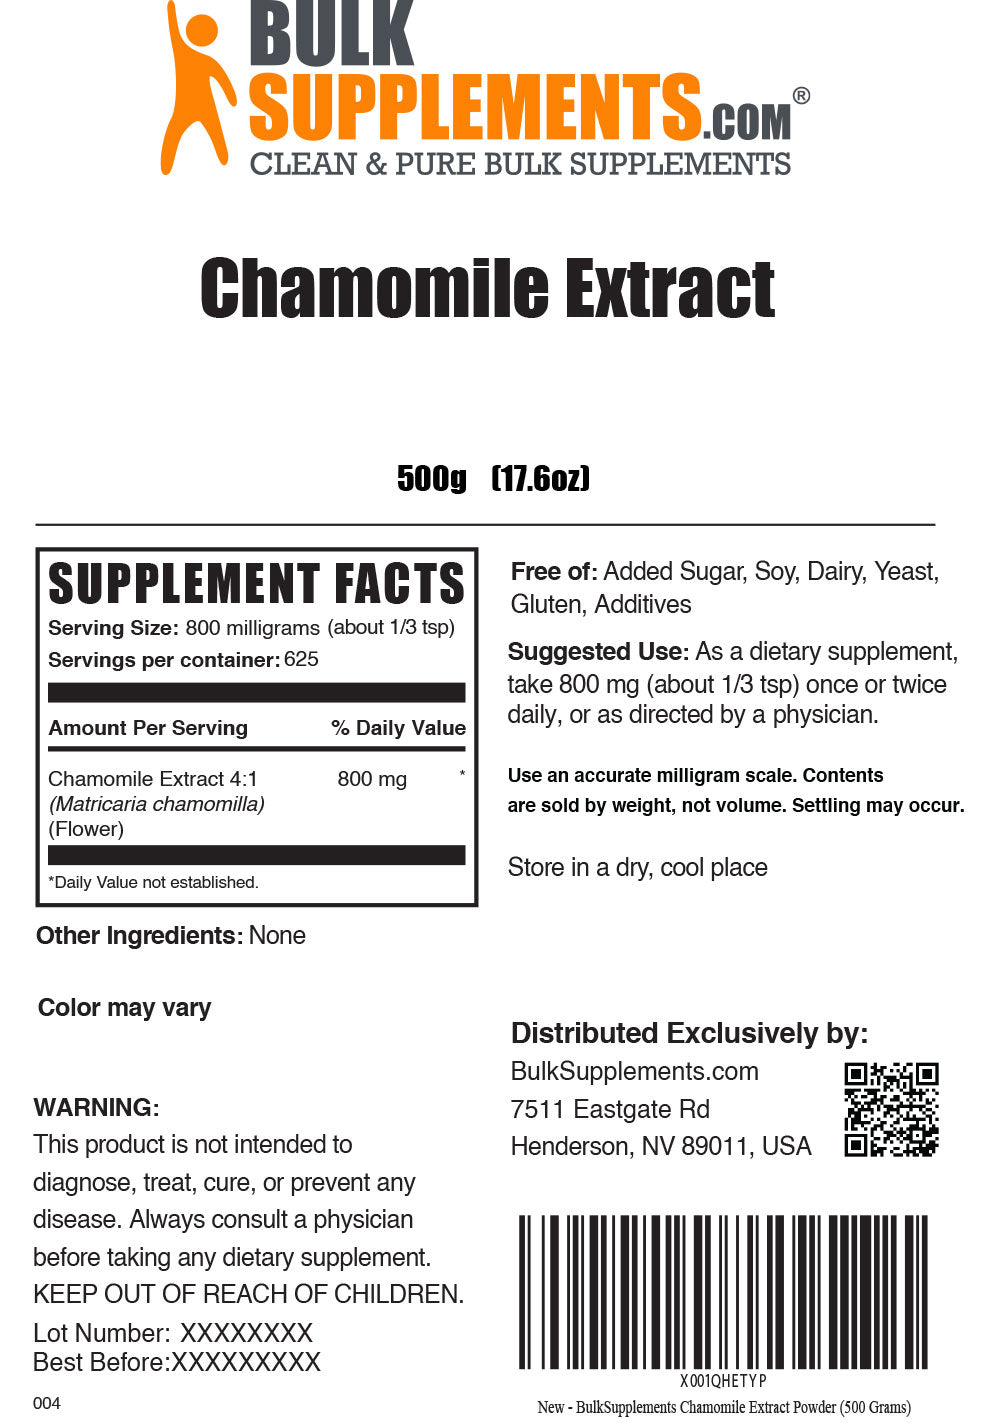 500g of chamomile extract supplement facts label